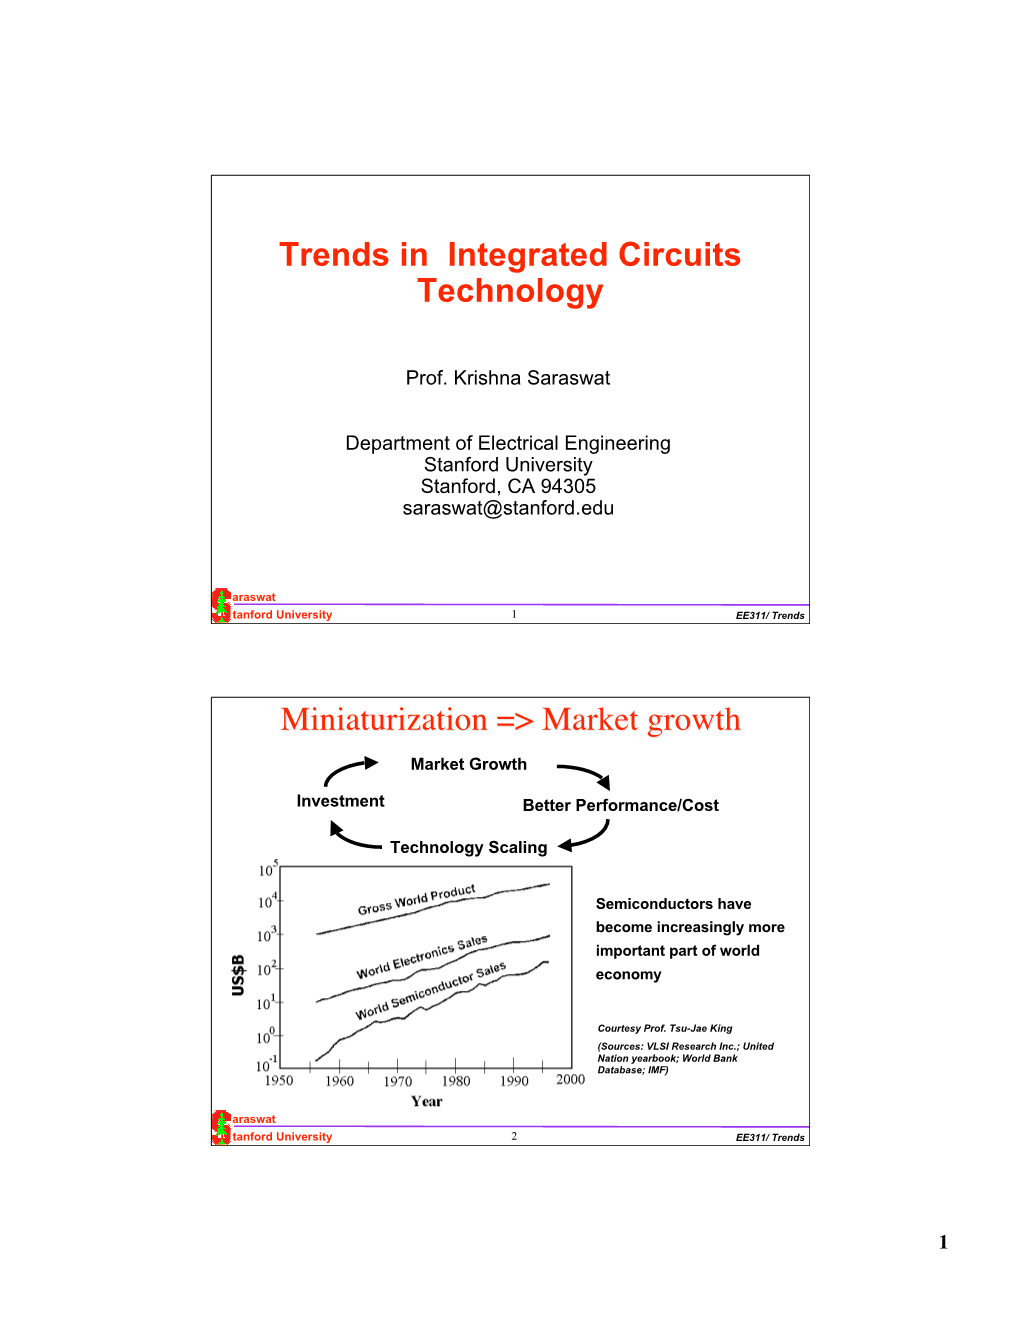 Trends in Integrated Circuits Technology